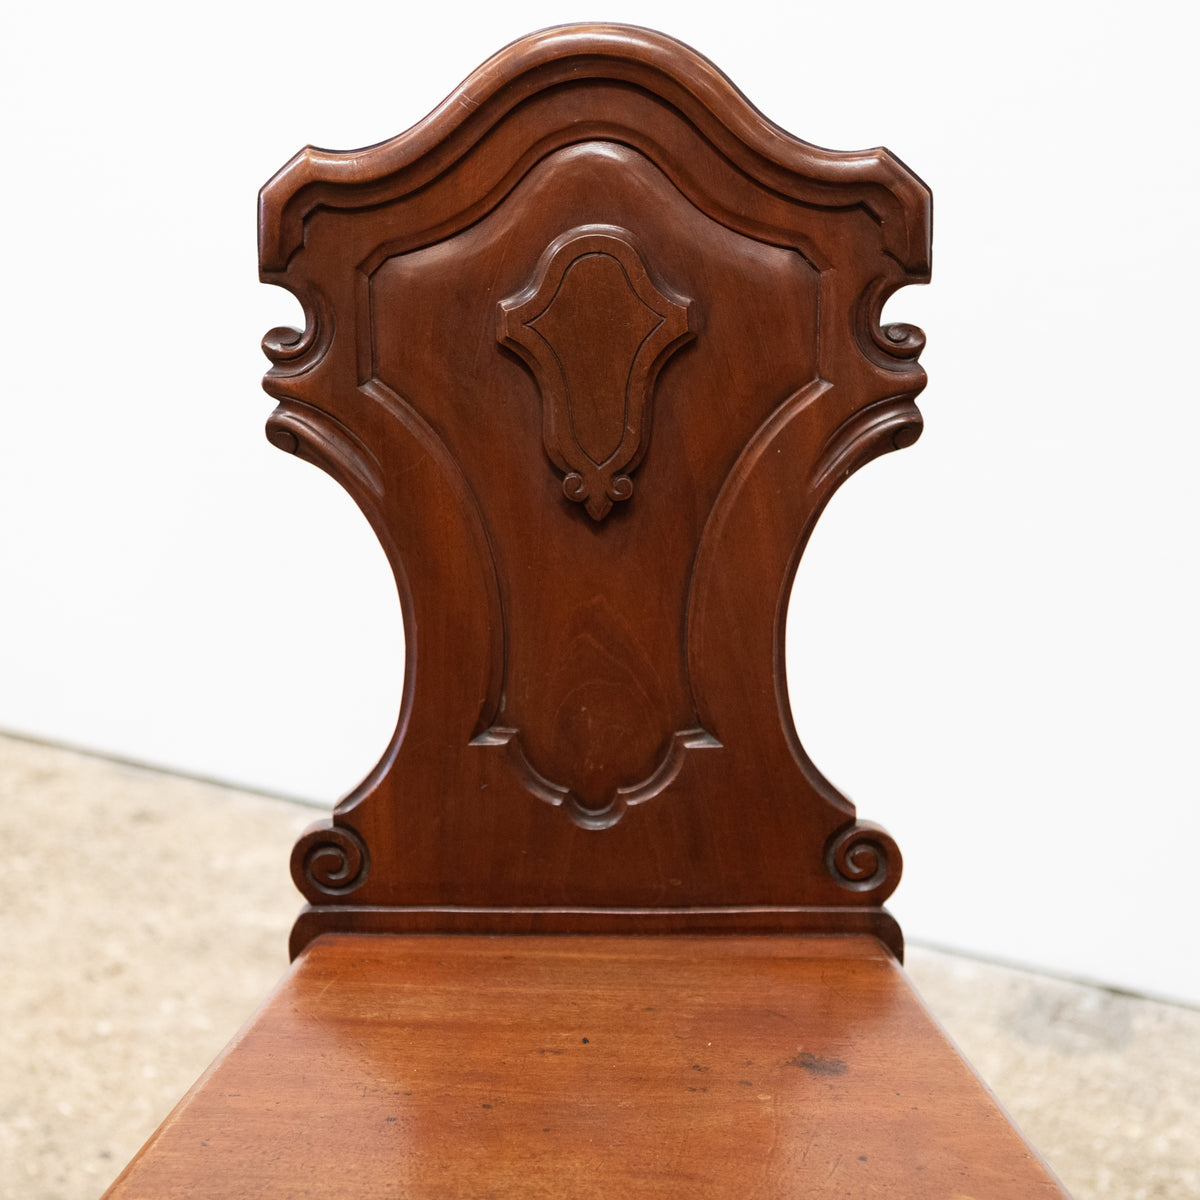 Pair Antique Mahogany Victorian Hall Chairs | The Architectural Forum